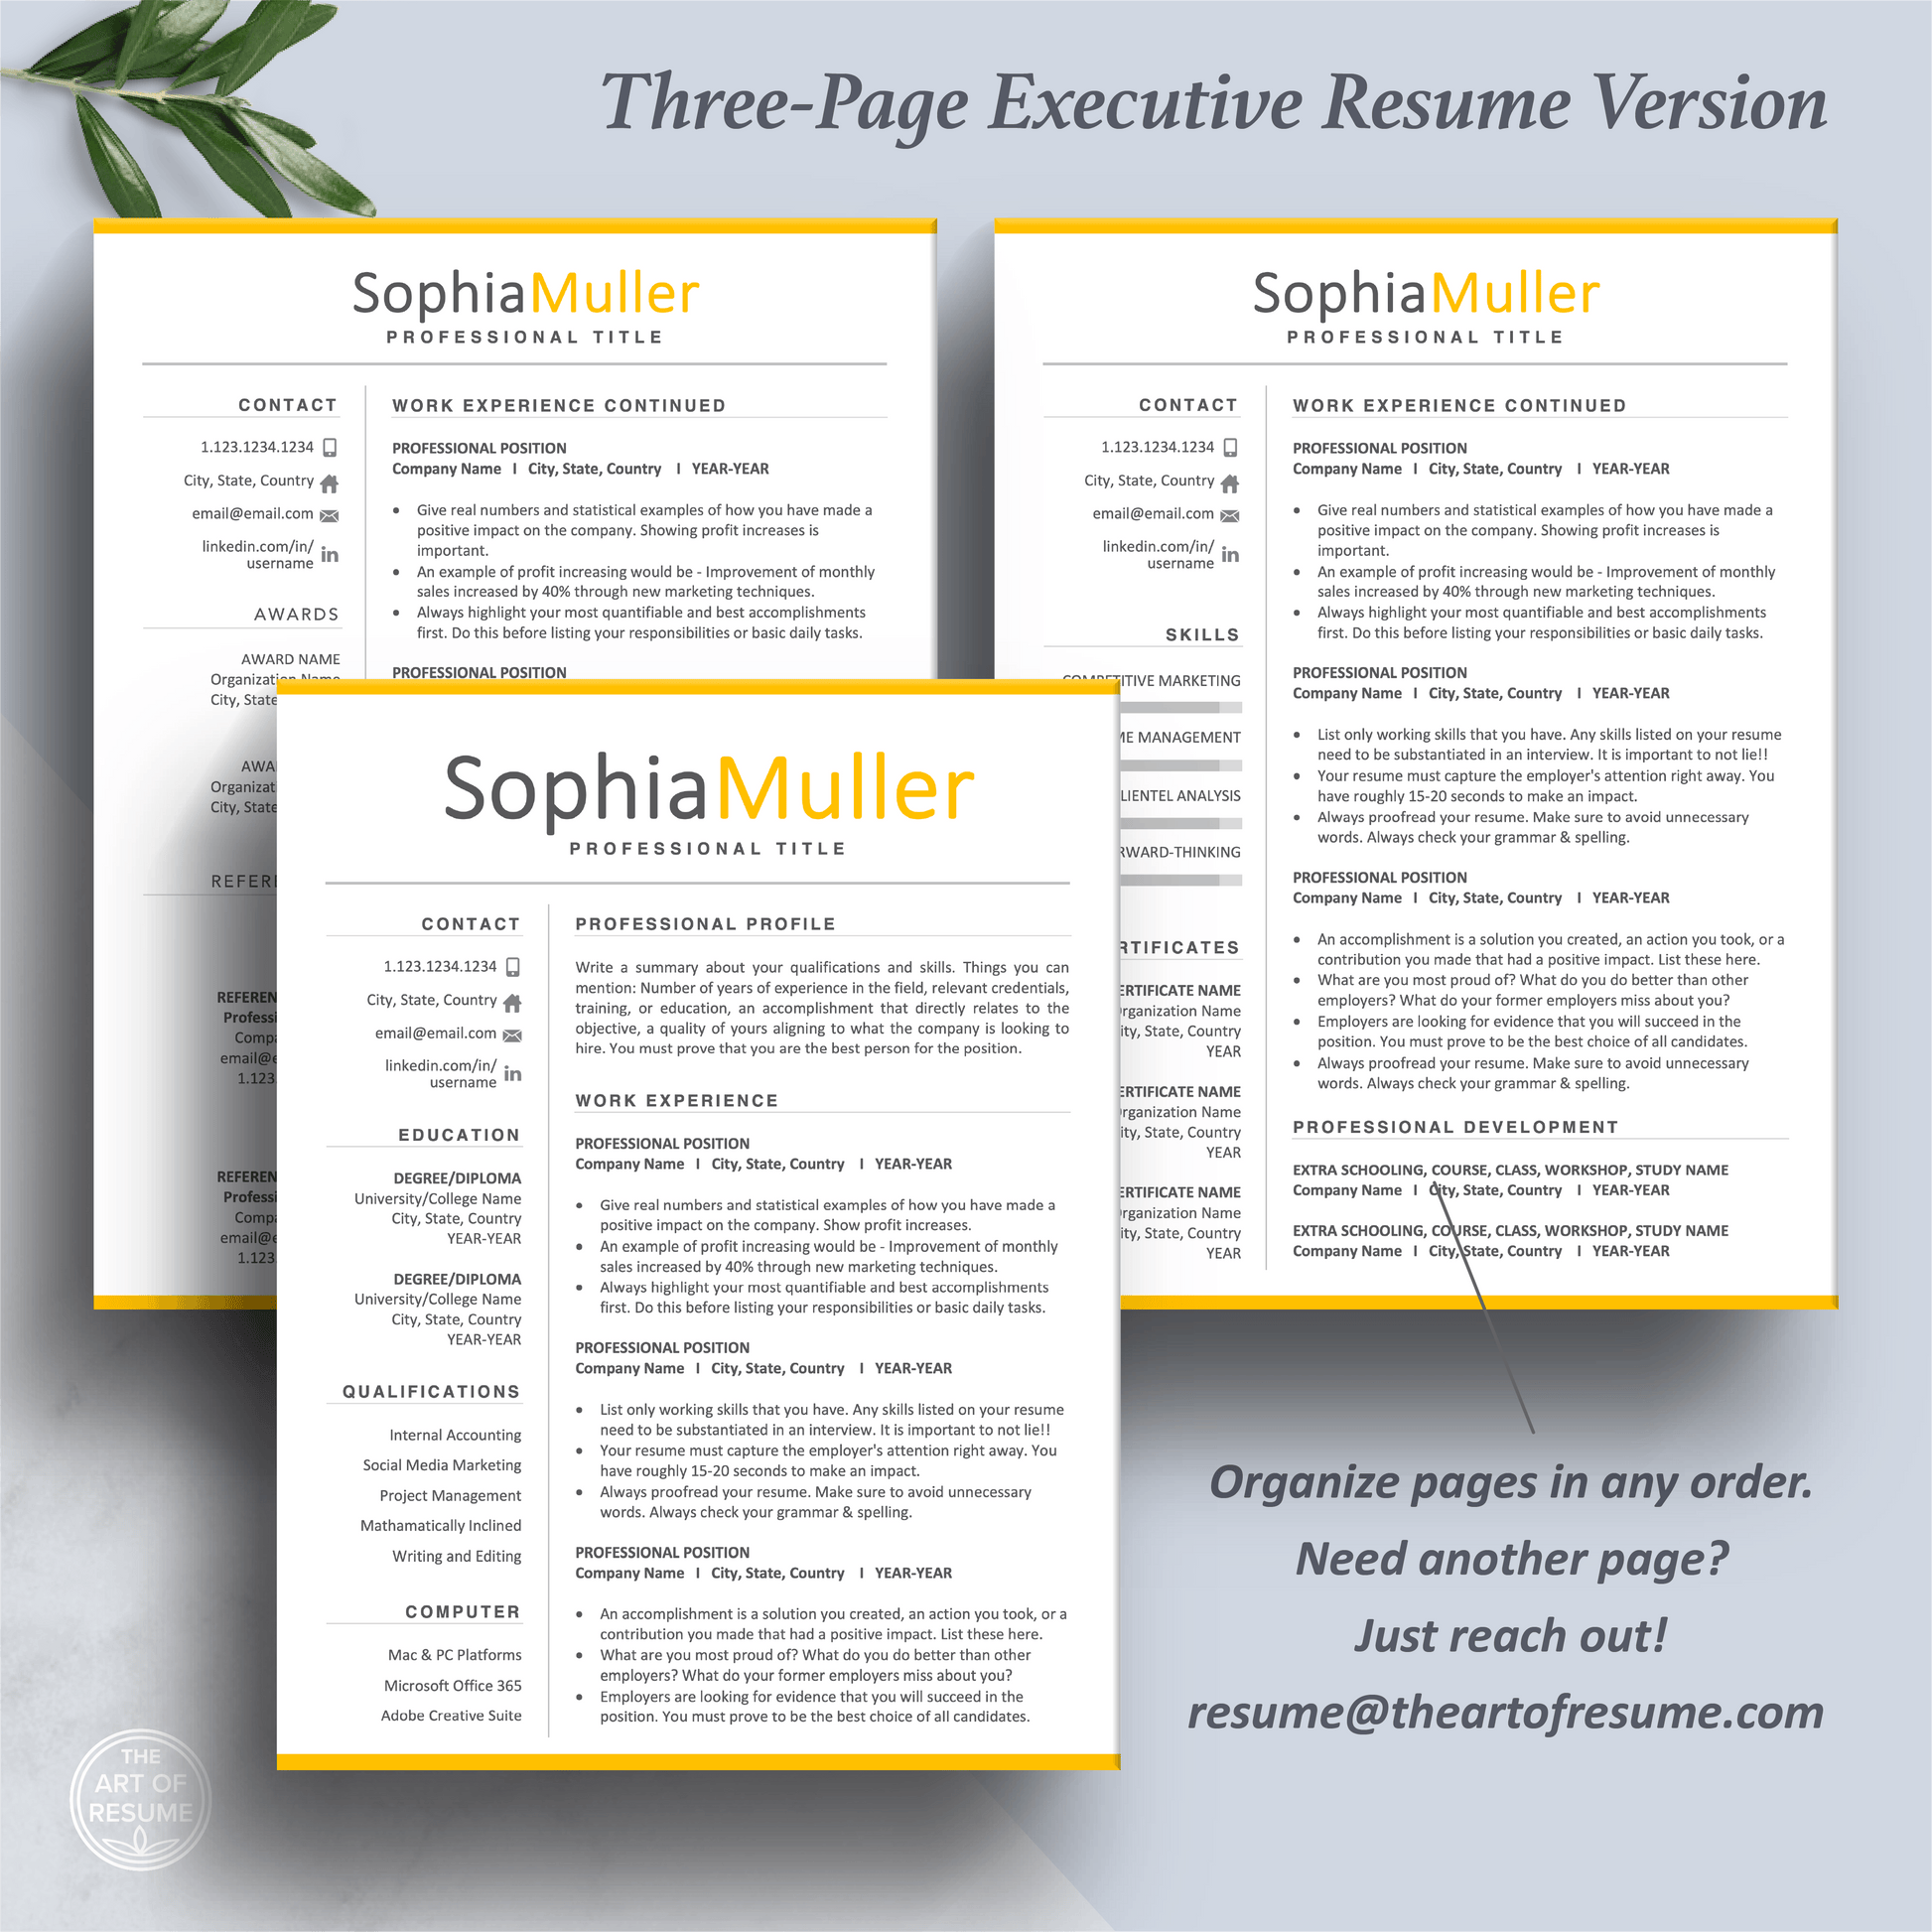 Professional Resume CV Template | Executive Resume Format | Resume Writing Guide - The Art of Resume